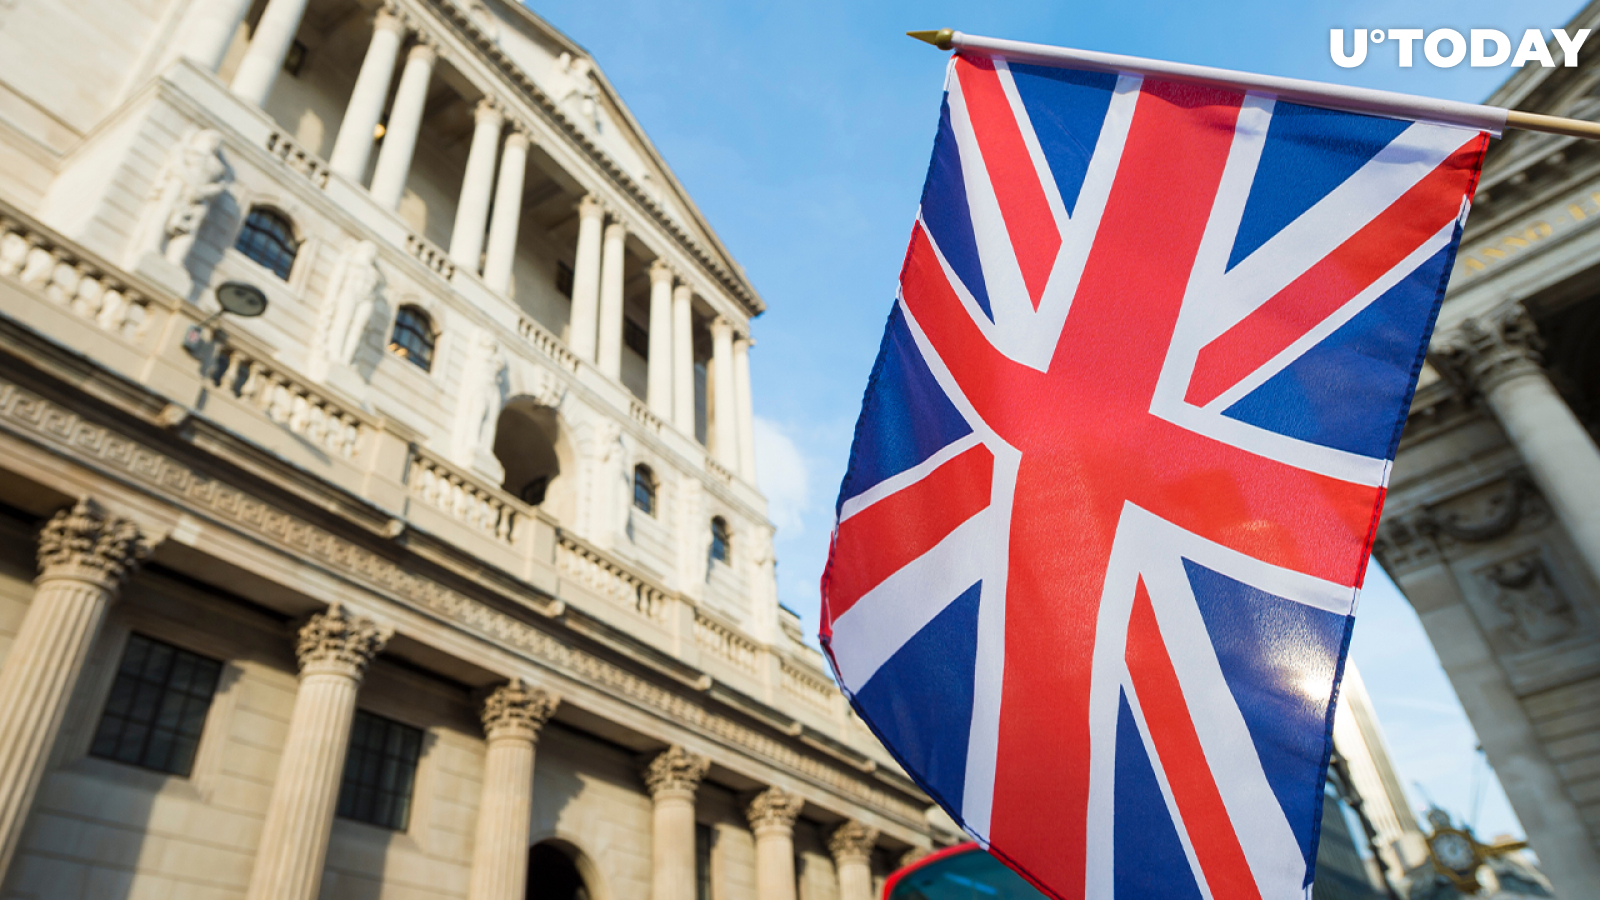 Bank of England Urges Banks to Fund Bigger Scrutiny of Crypto